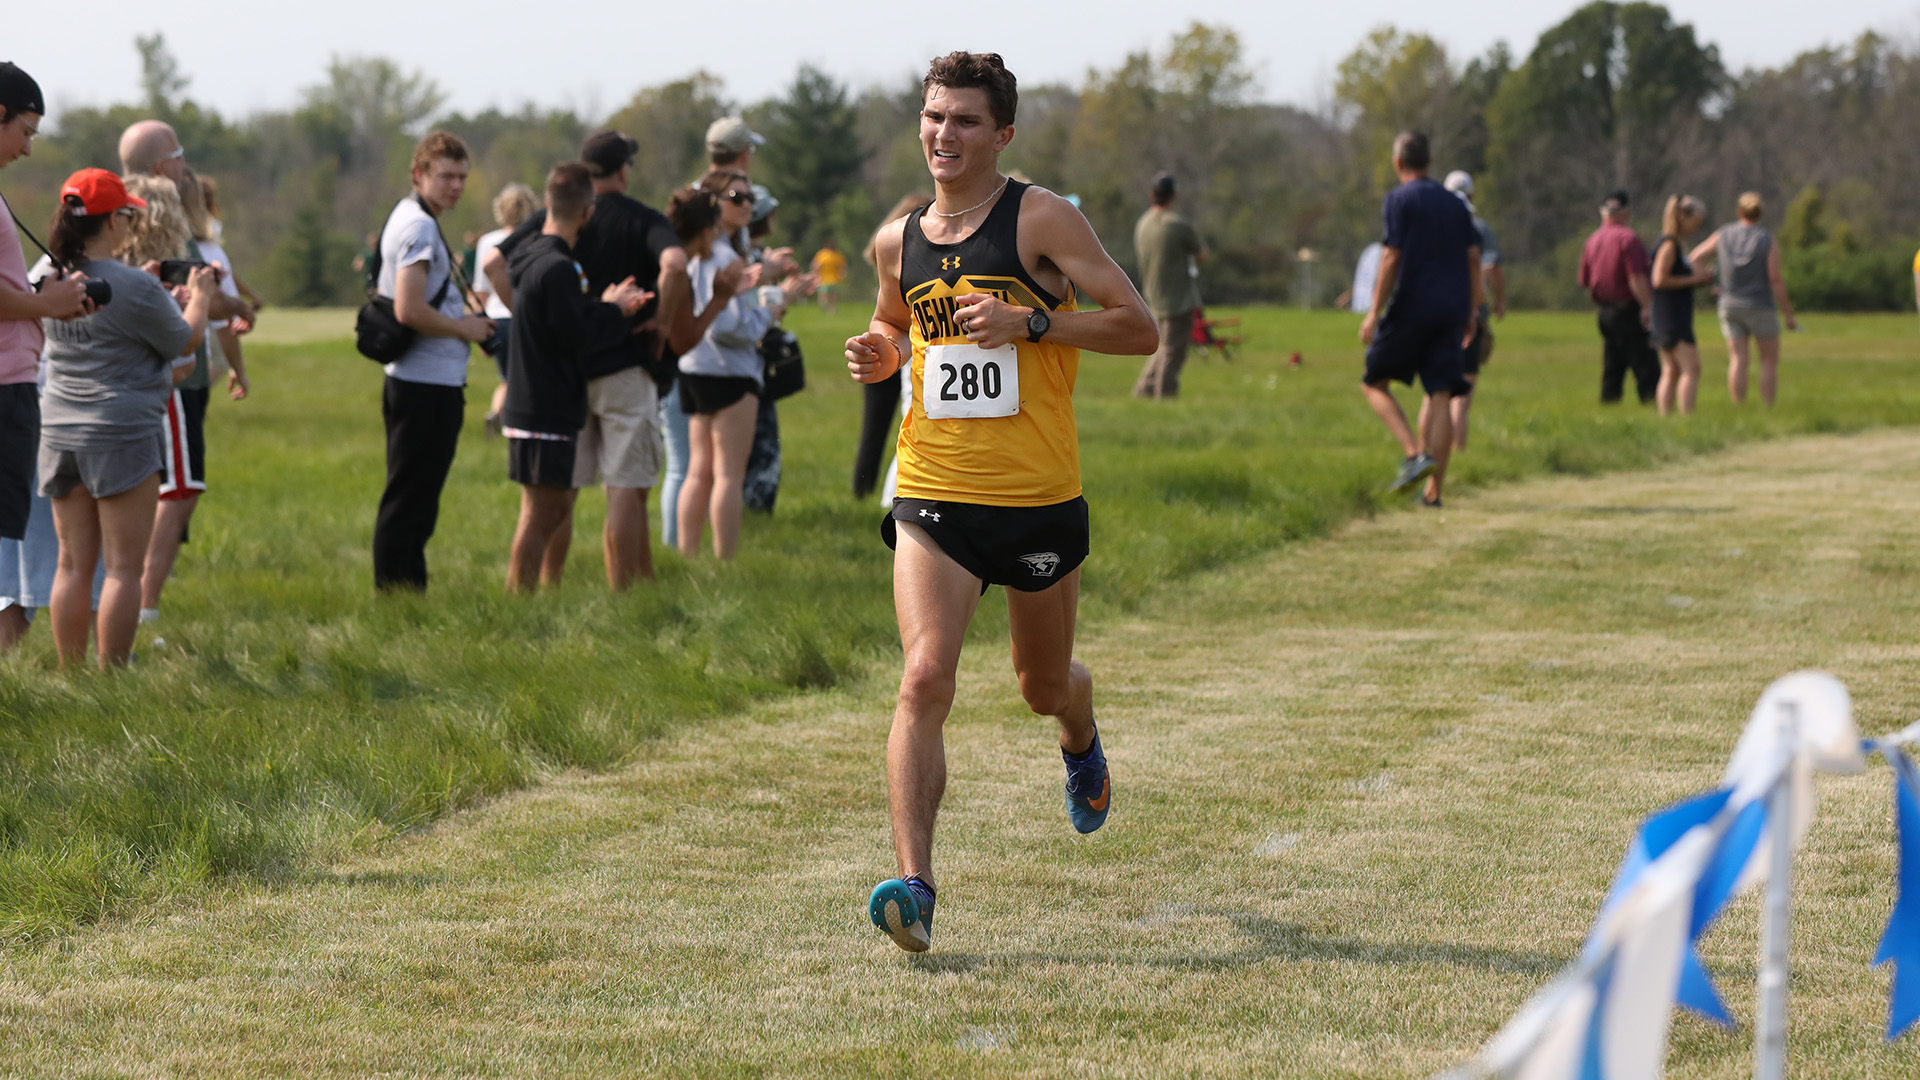 Mitchell Bradford crossed the finish line at the Blugold Invitational in 27th place.